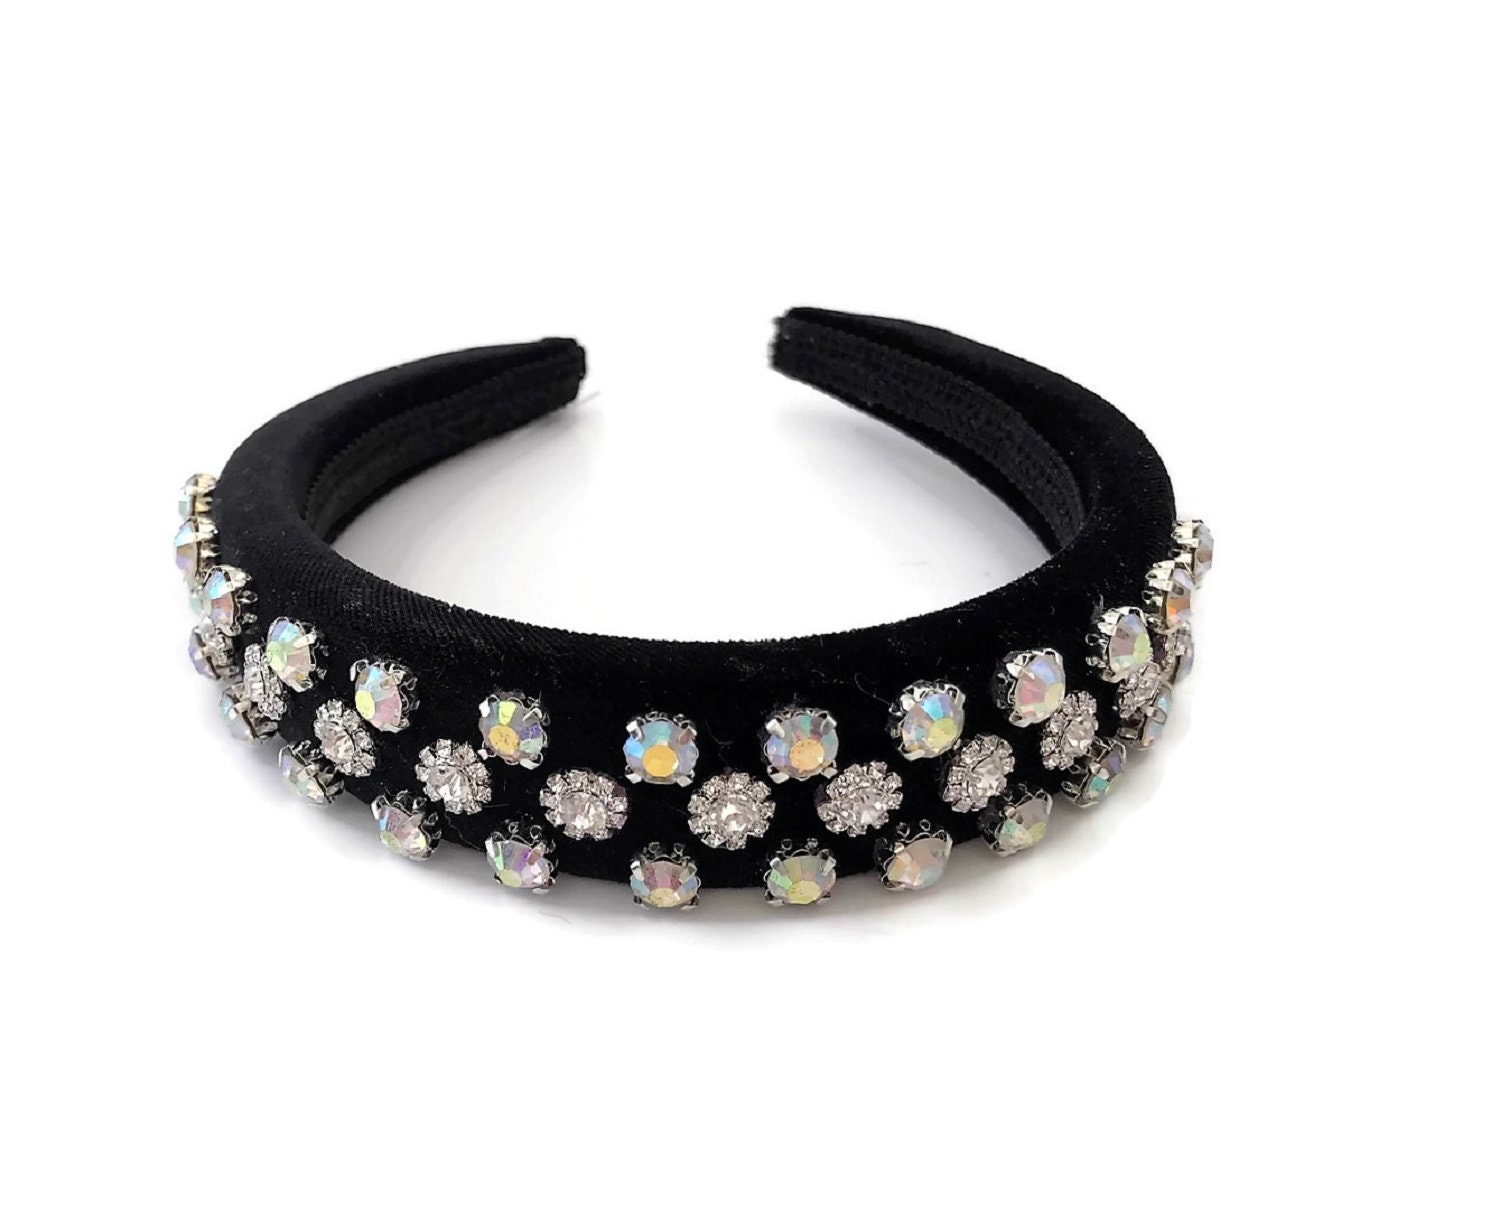 Beautiful Black Smooth Flock Covered Padded Alice Band with Clear and AB Crystal Diamante Jewels 2.6 cms Wide Fascinator Hair Jewellery